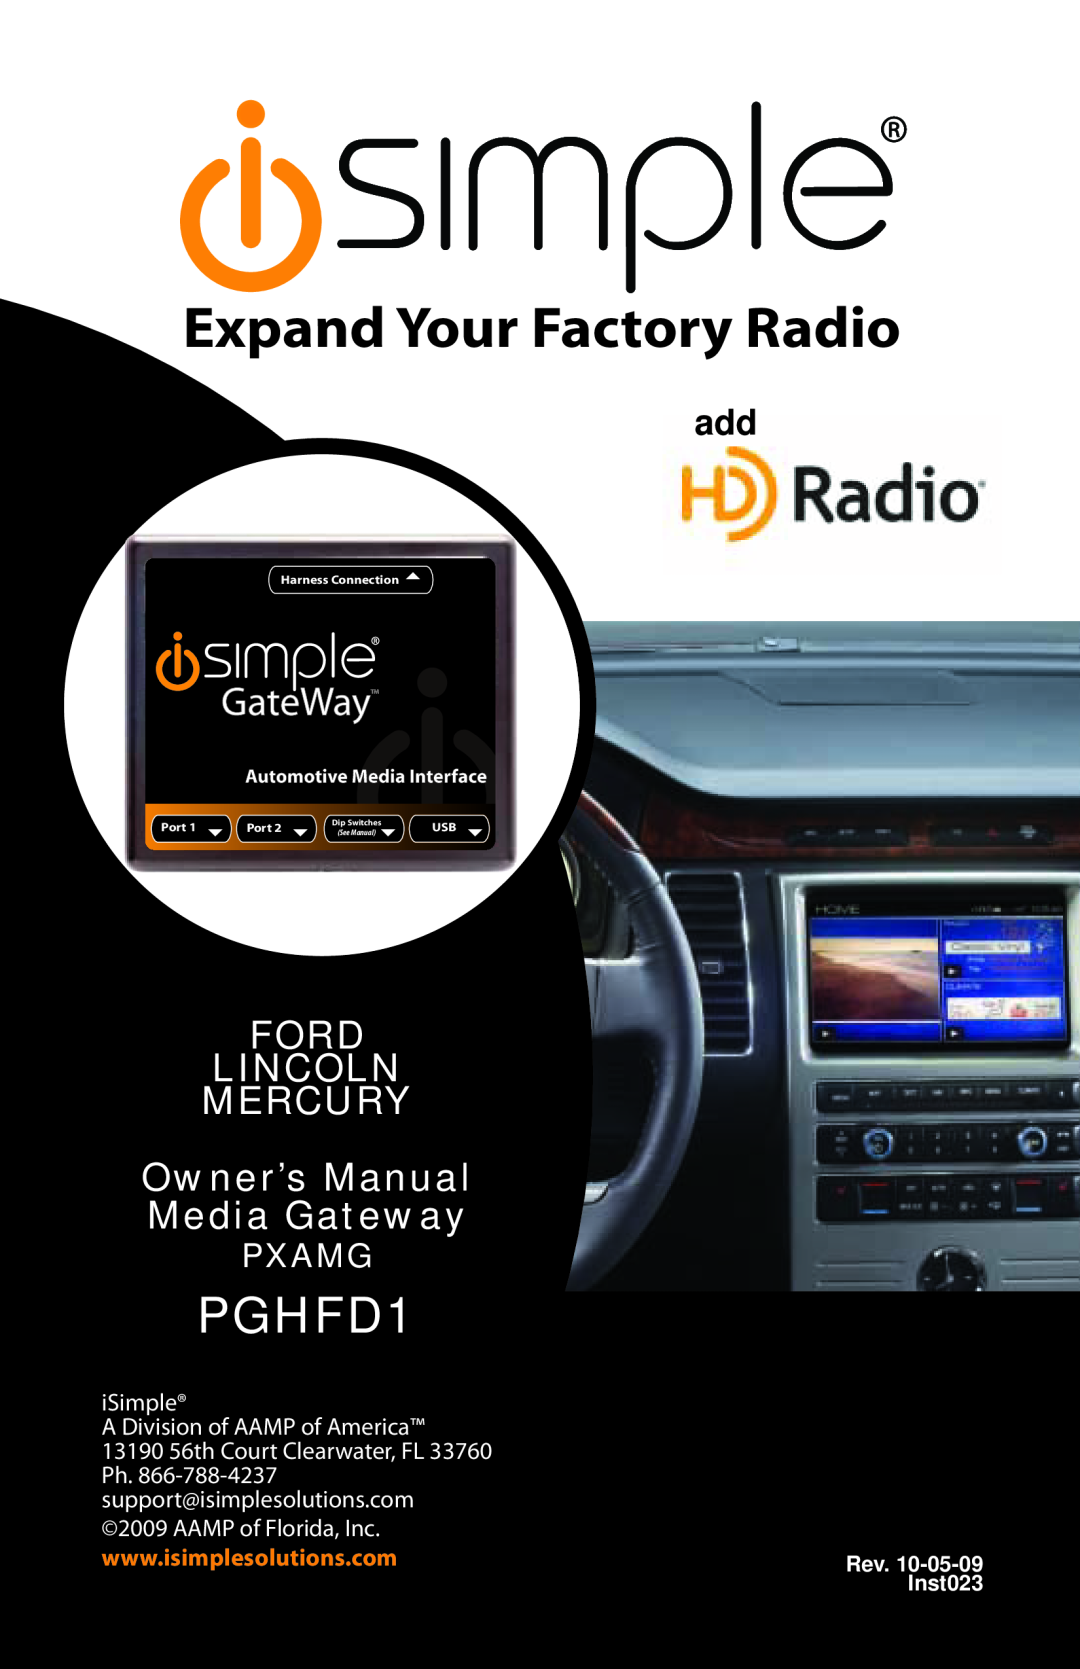 iSimple PGHFD1 owner manual Expand Your Factory Radio, FORD LINCOLN MERCURY Owner’s Manual Media Gateway, Pxamg, Inst023 